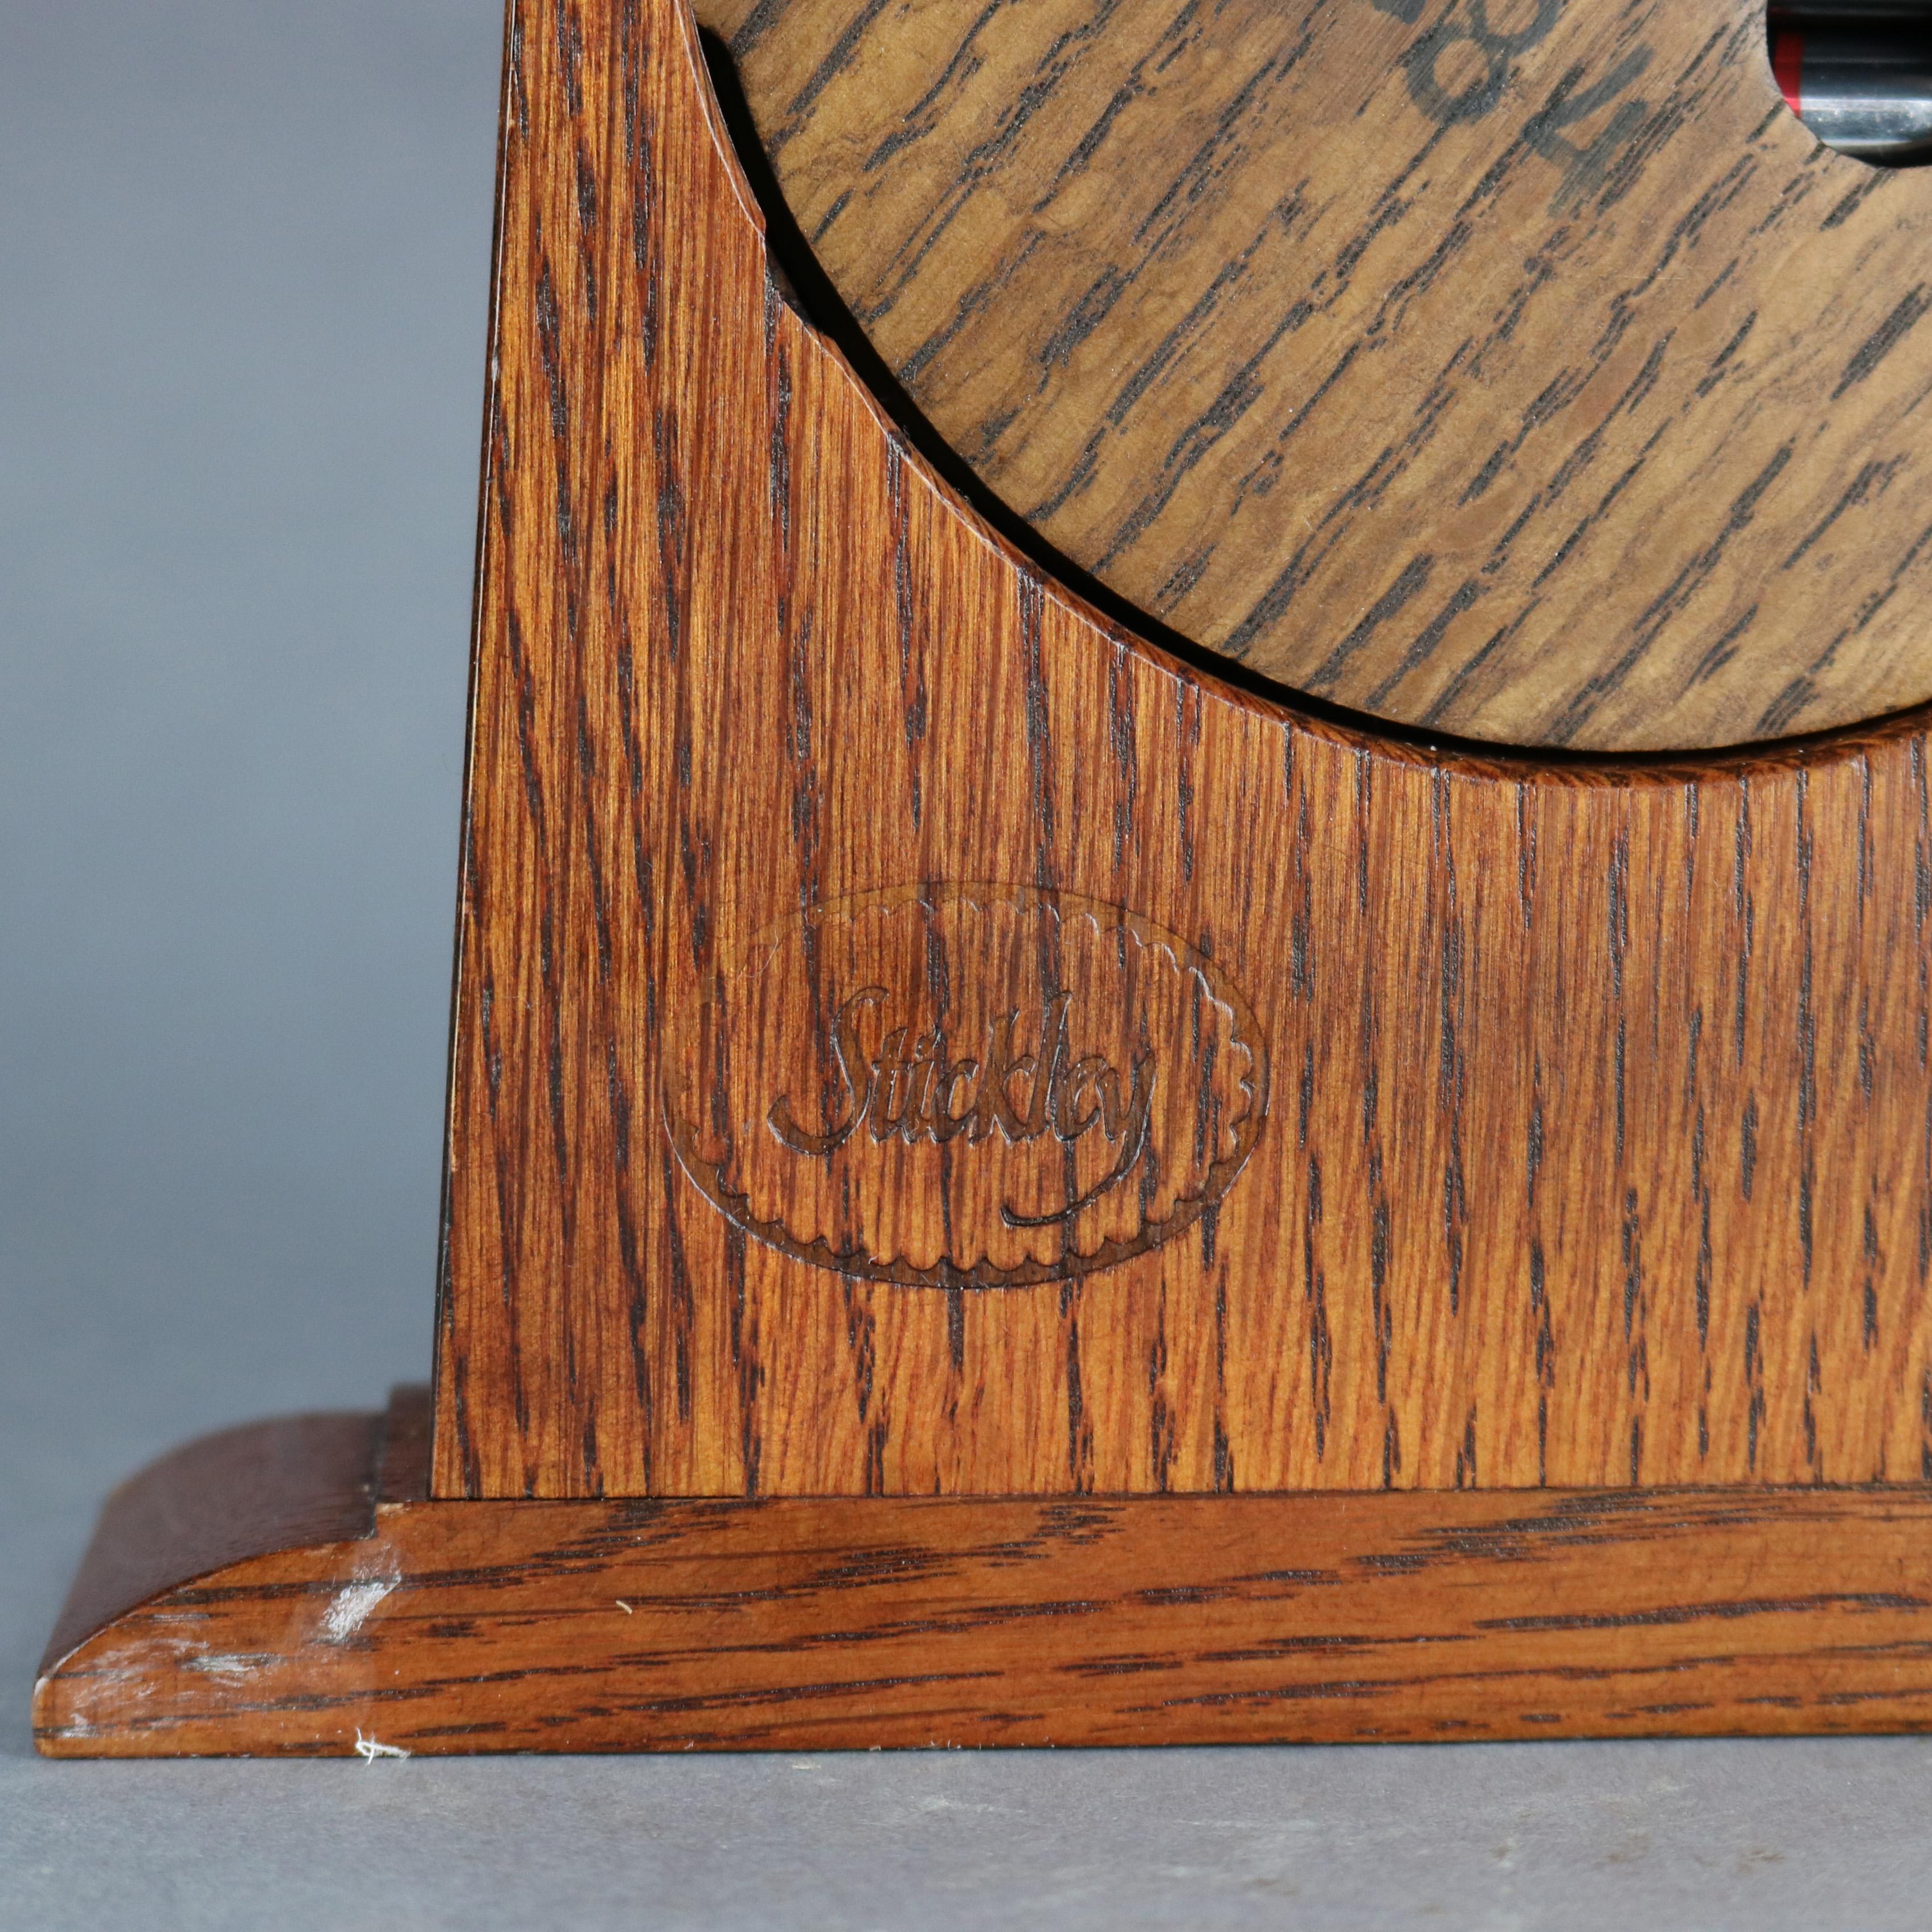 An antique Arts & Crafts mission mantle clock by Stickley offers oak construction, battery operated, signed and labeled en verso as photographed, 20th century

Measures: 8.5